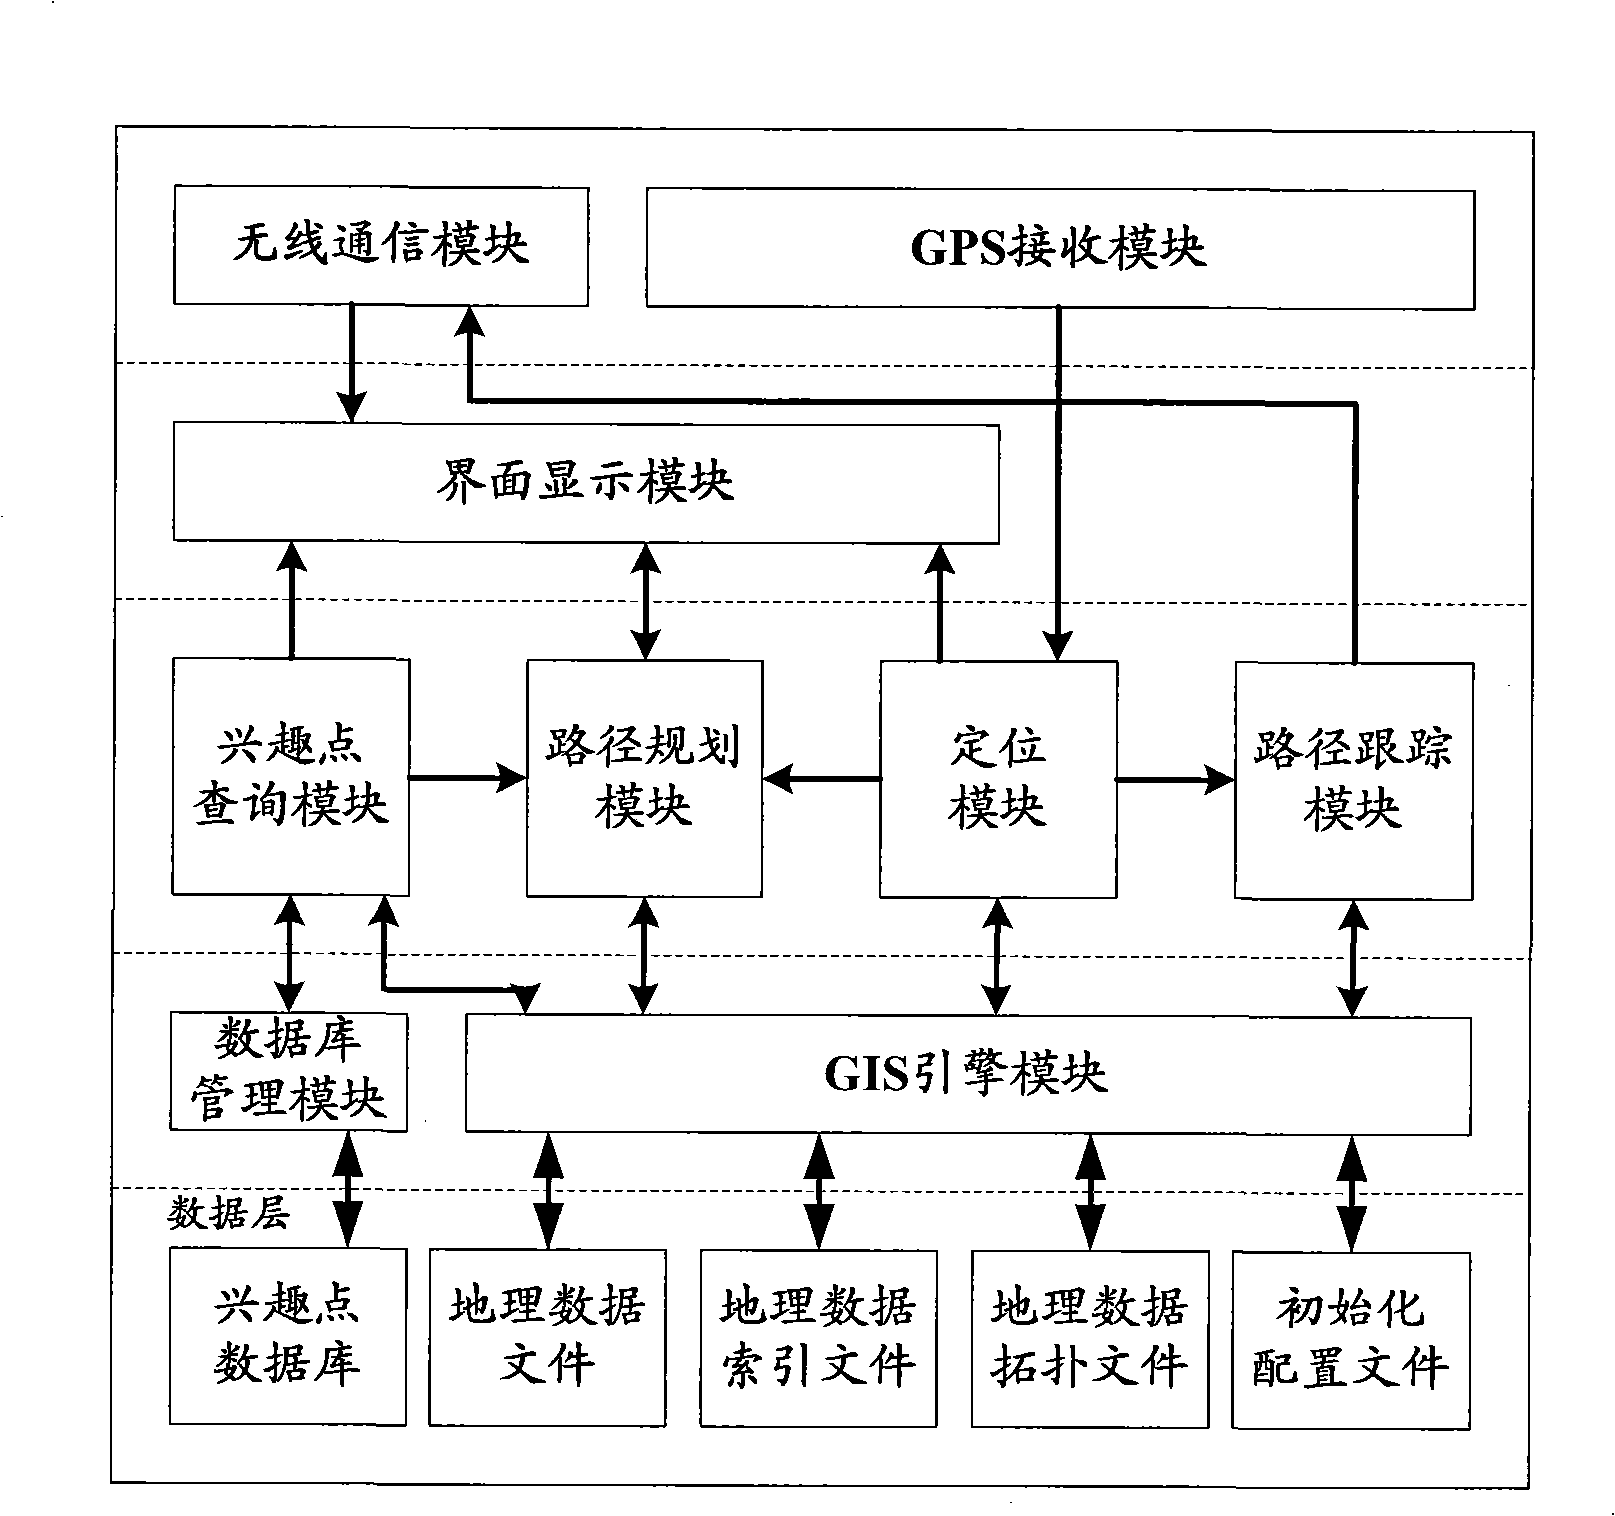 System for providing local mobile geographic information service based on GPS and mobile terminal